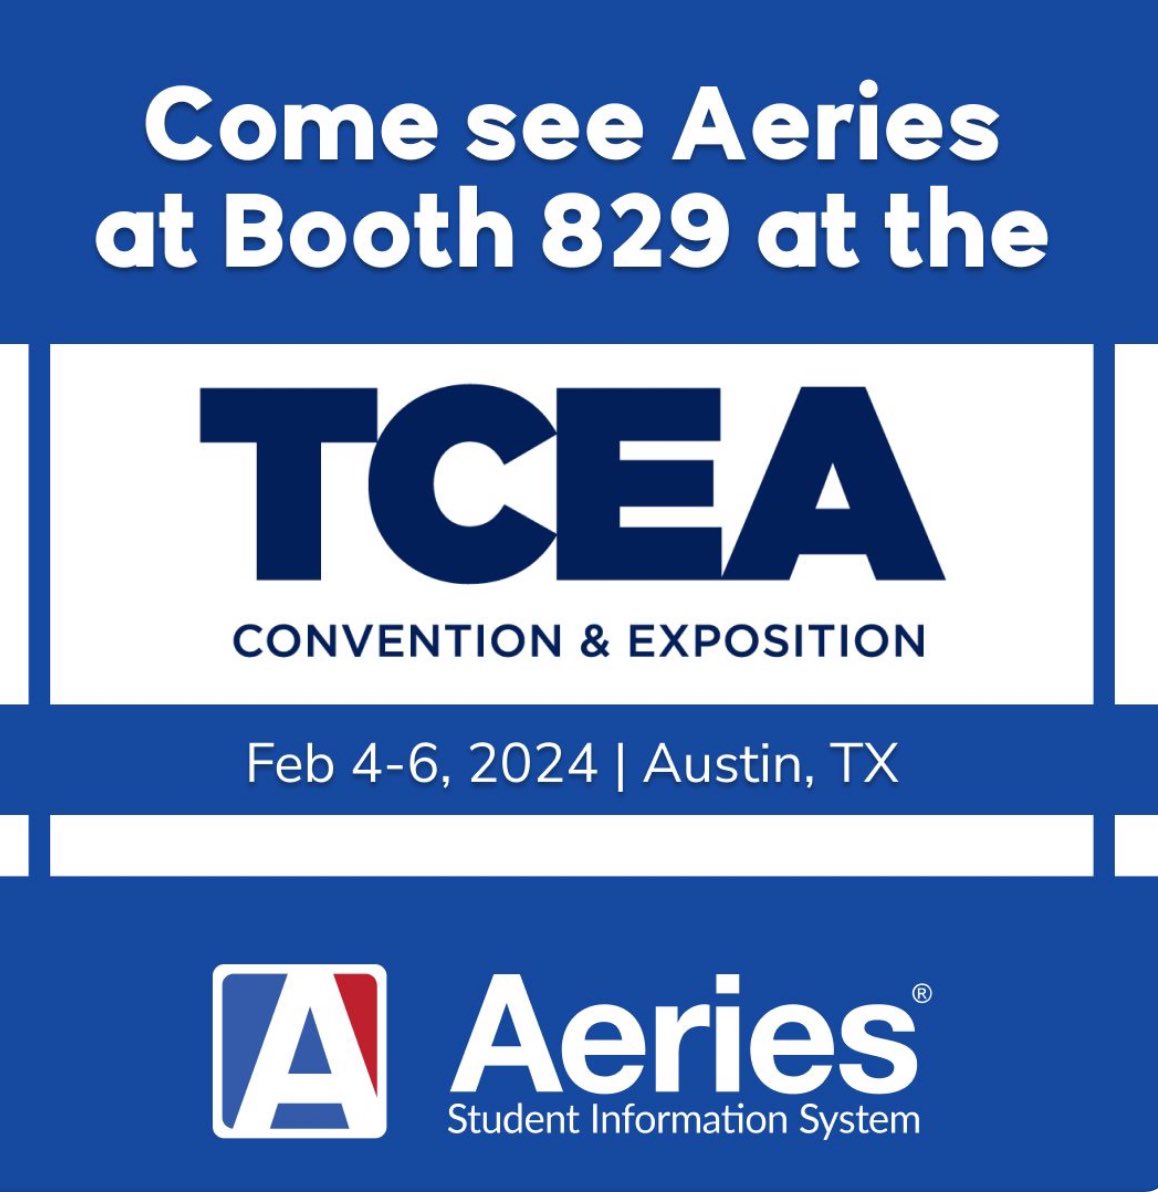 Headed to #TCEA24 today! Come say 'Hi' at booth 829! @AeriesSIS #TCEA #edtech